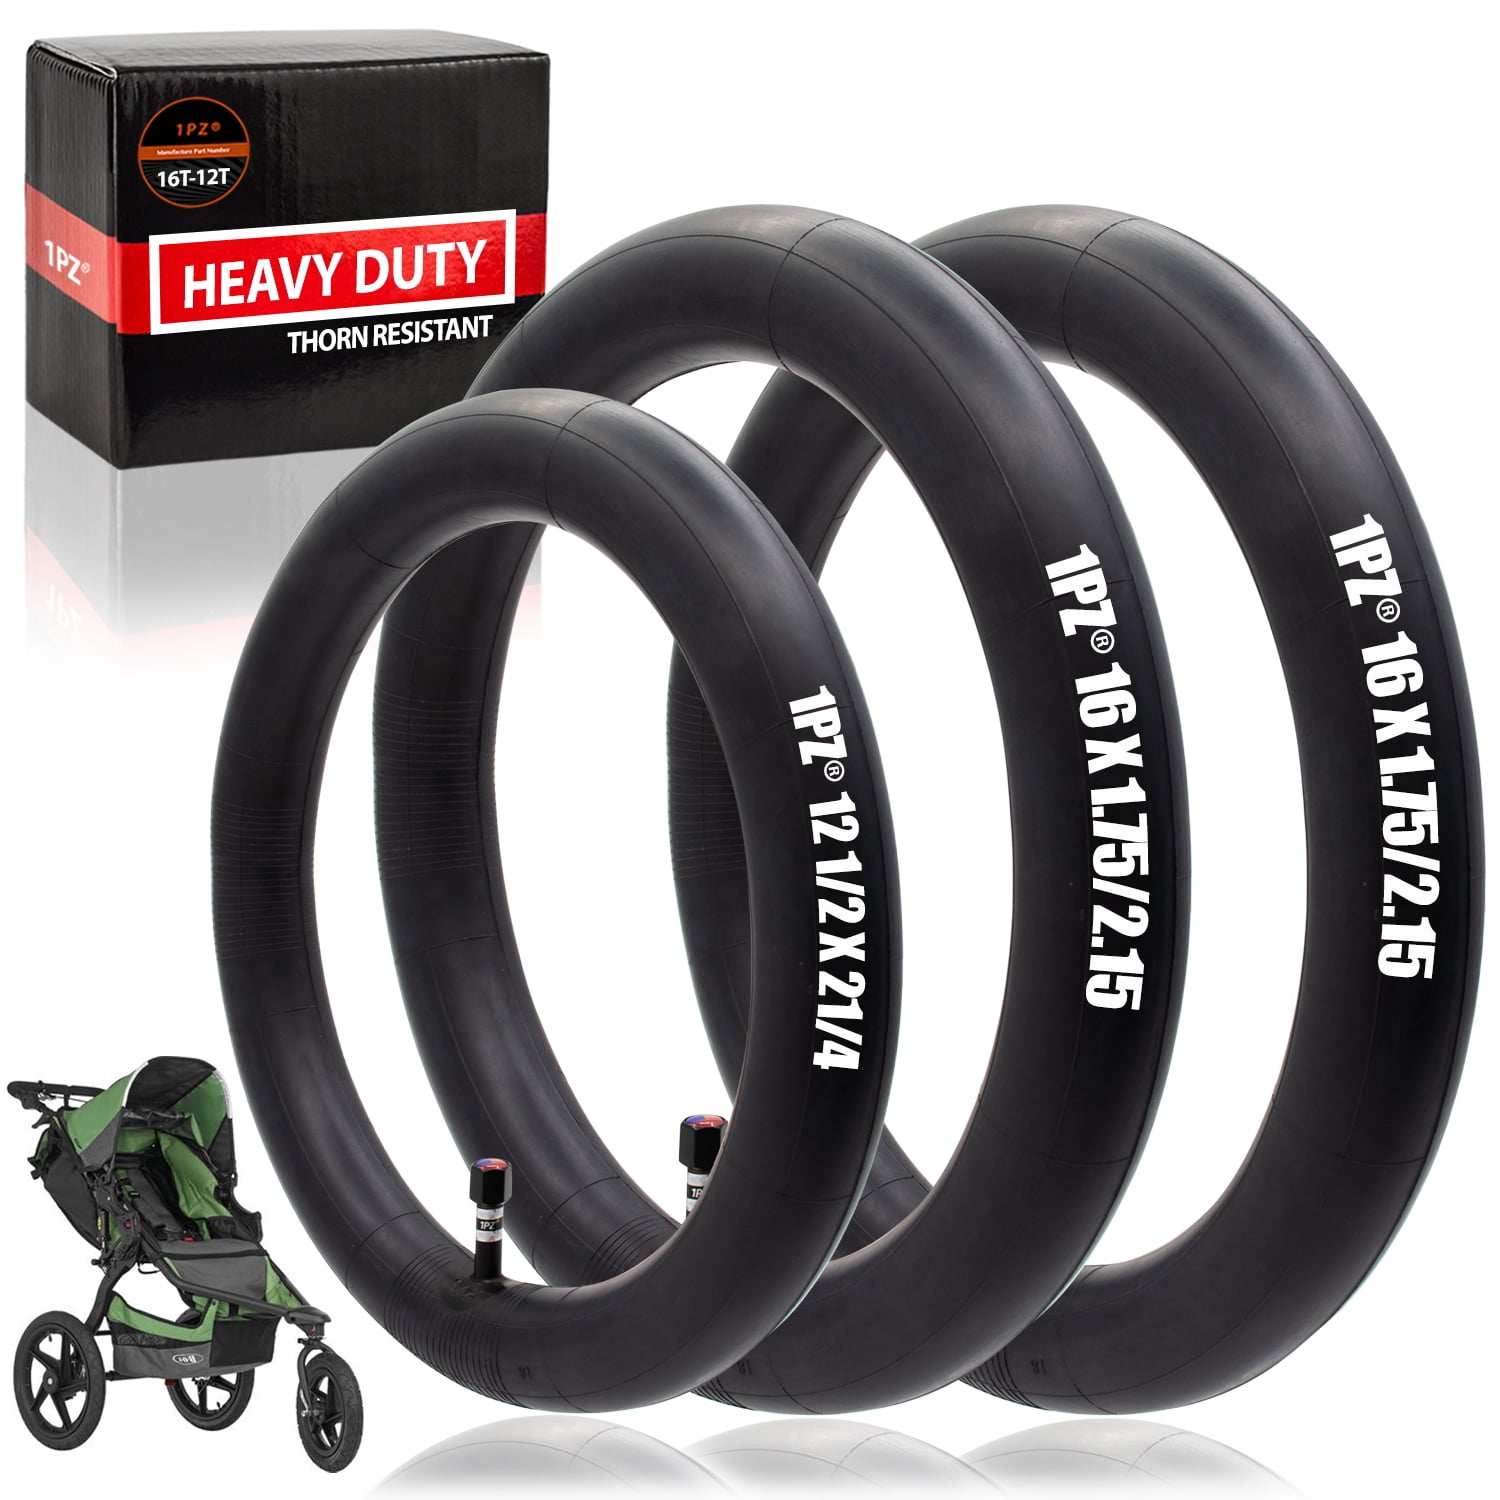 bob stroller tire tube replacement